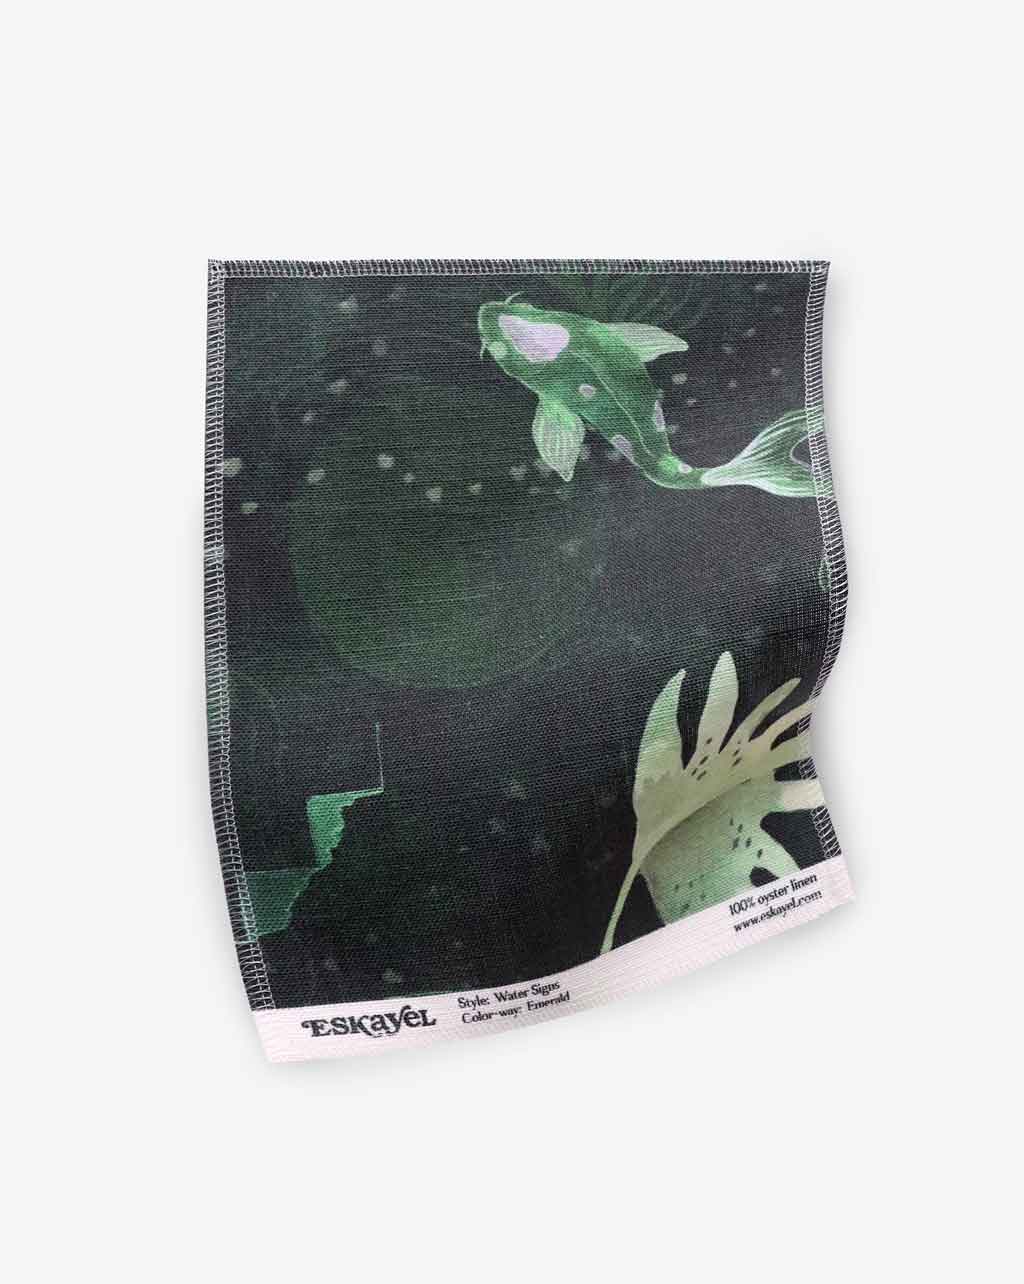 A Water Signs Fabric Emerald hand fabric with an image of a koi fish